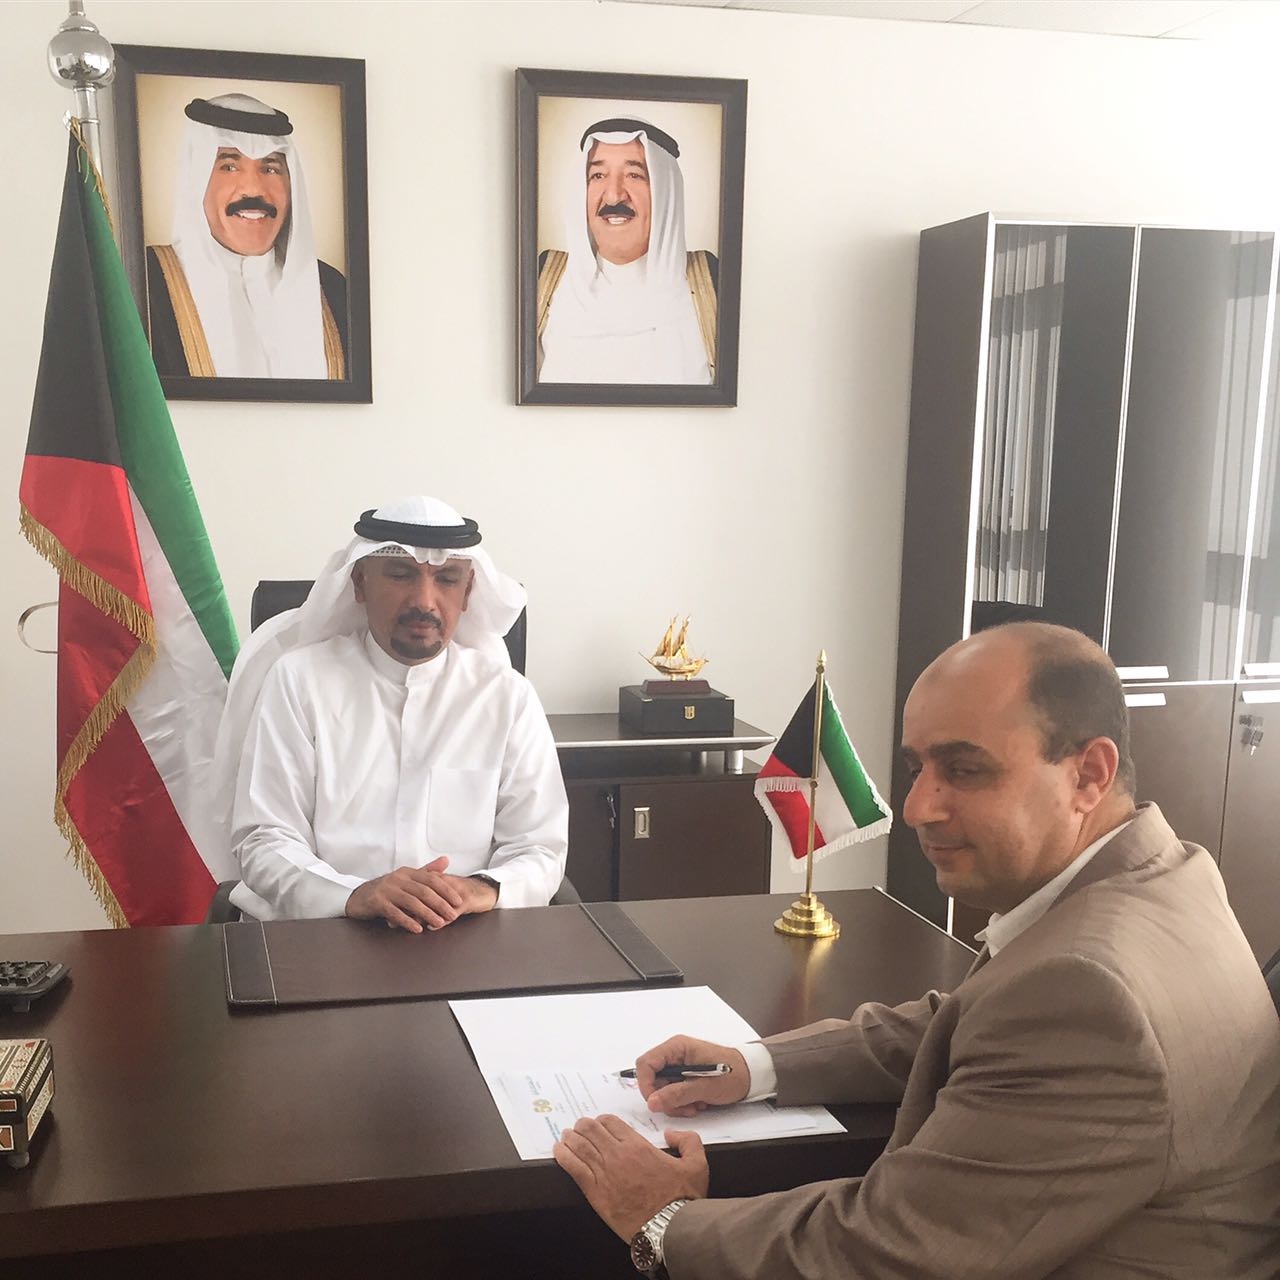 Director of the African Relief Organization, Sami Al-Azeb and Kuwaiti Ambassador to Tanzania Jassem Al-Najem during the signing ceremony